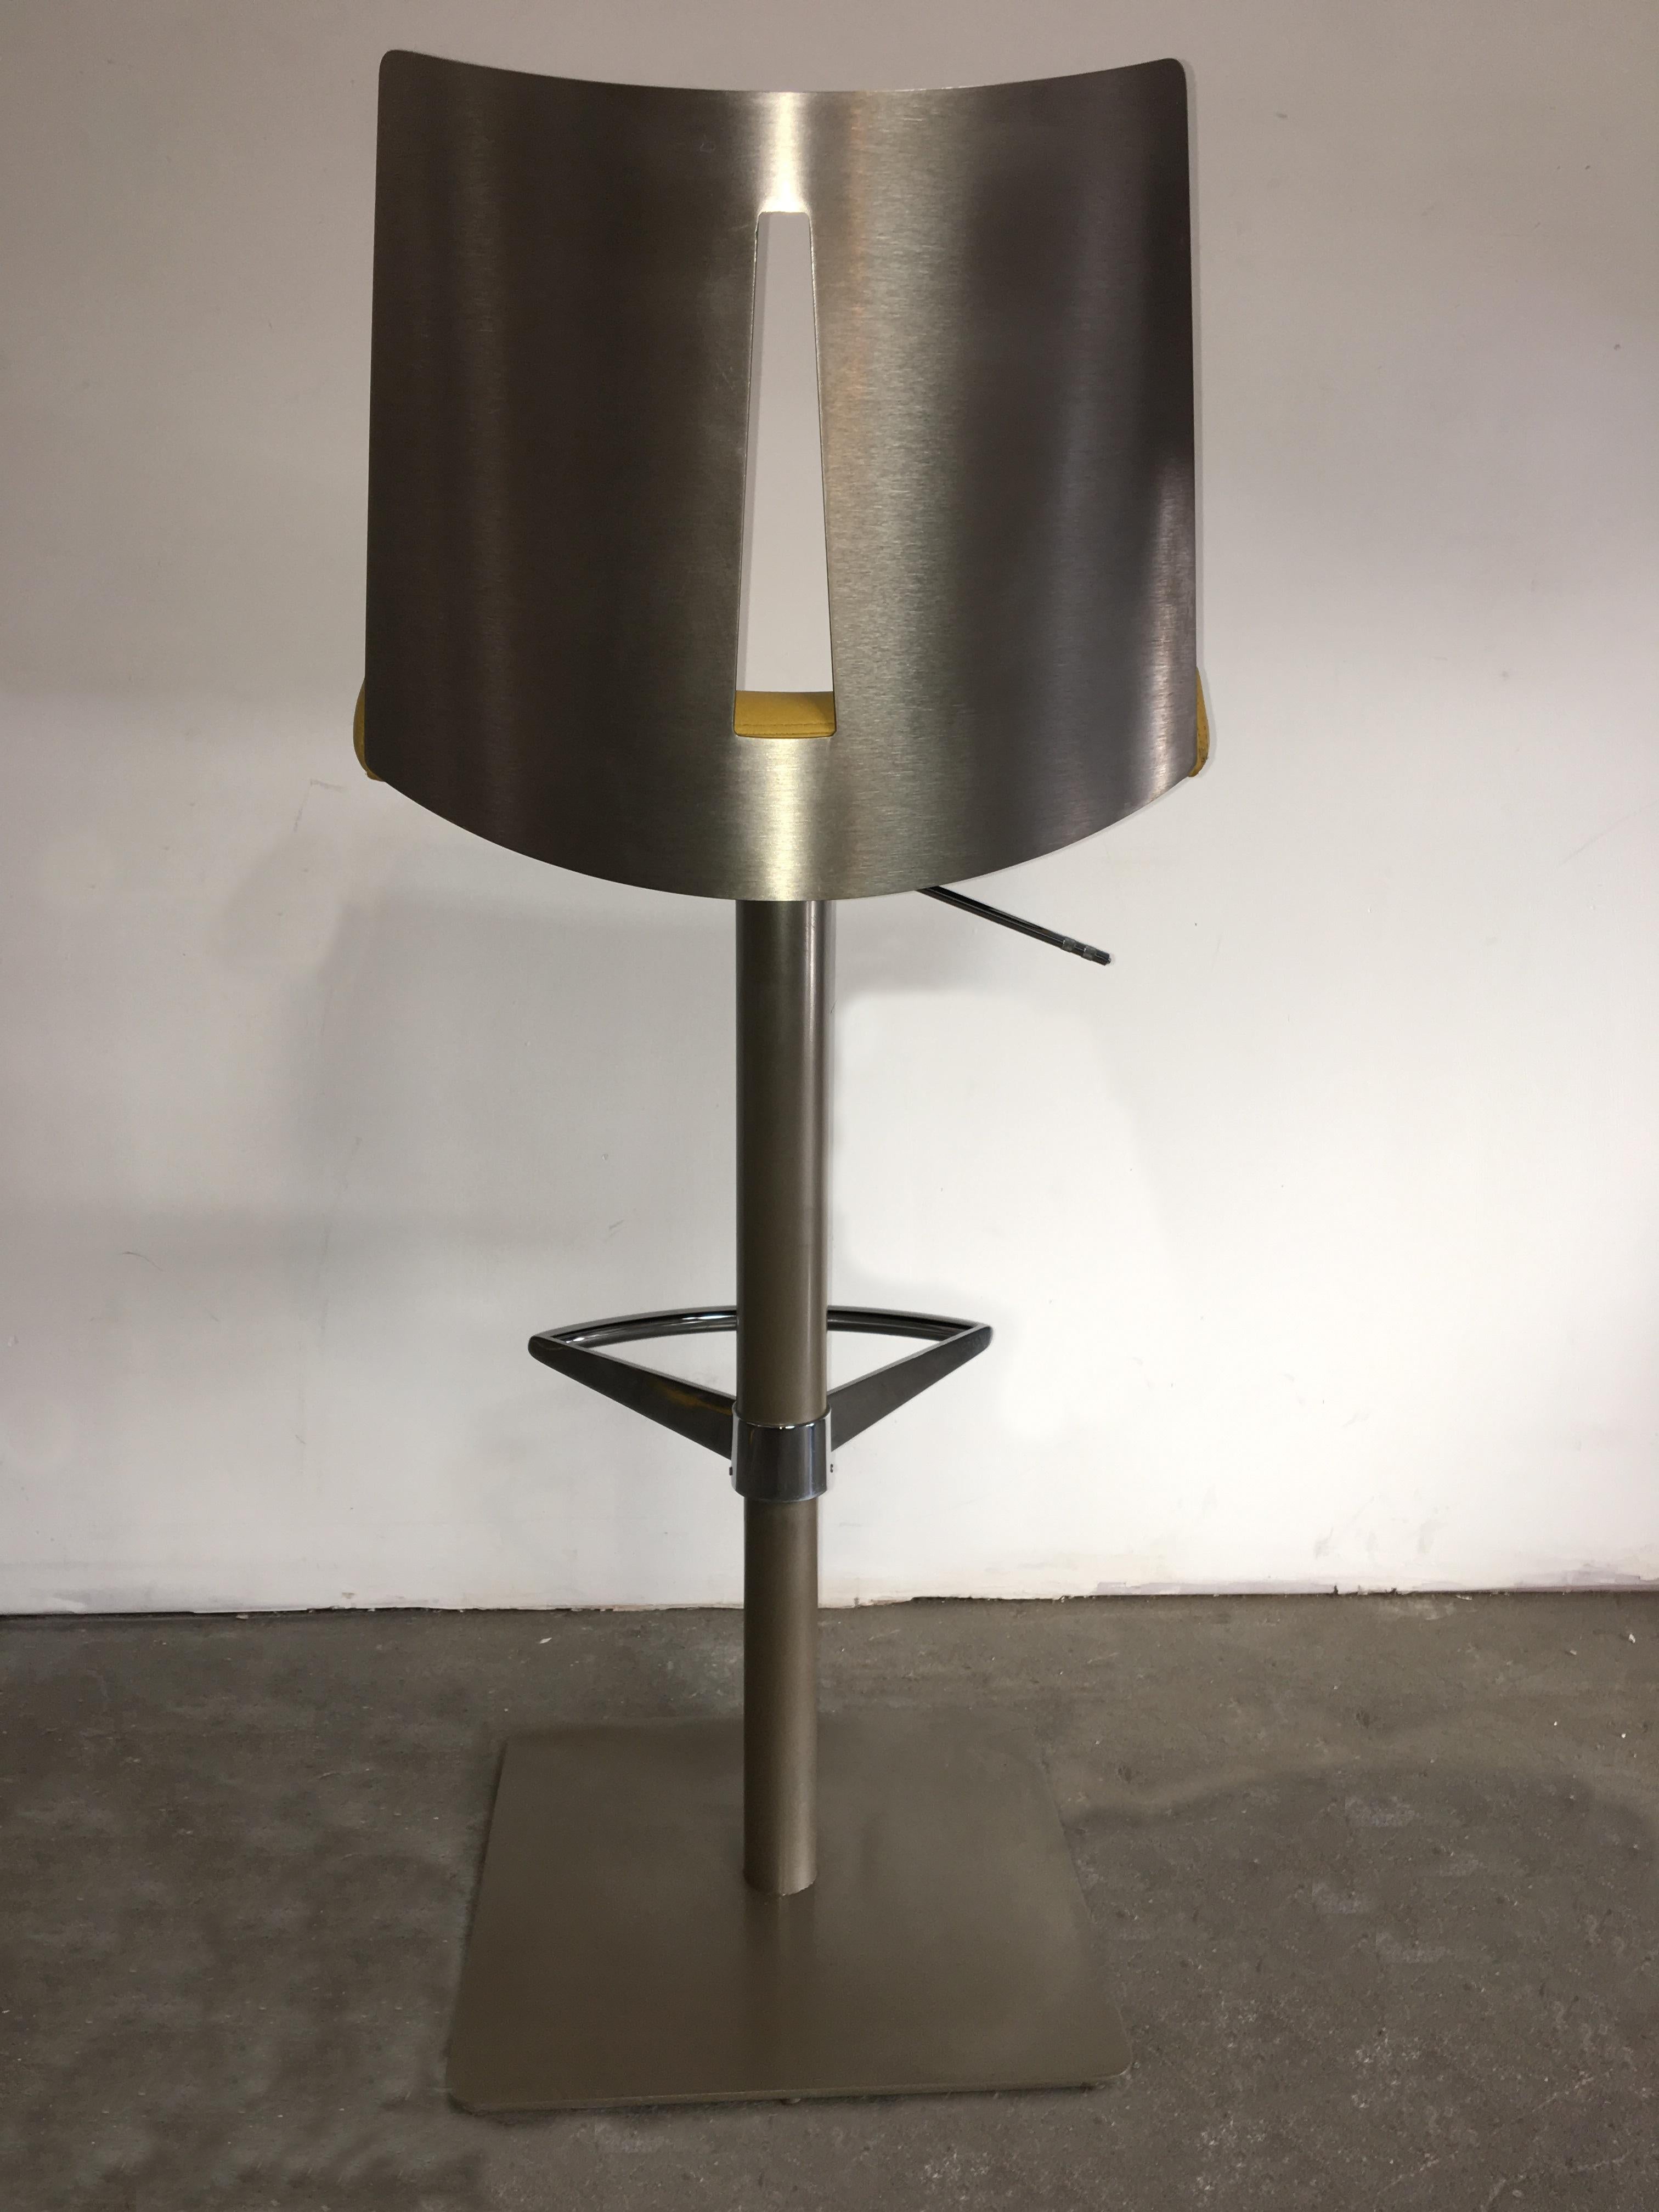 20th Century Pair of Brushed Steel Swivel and Adjustable Barstools or Countertop stools